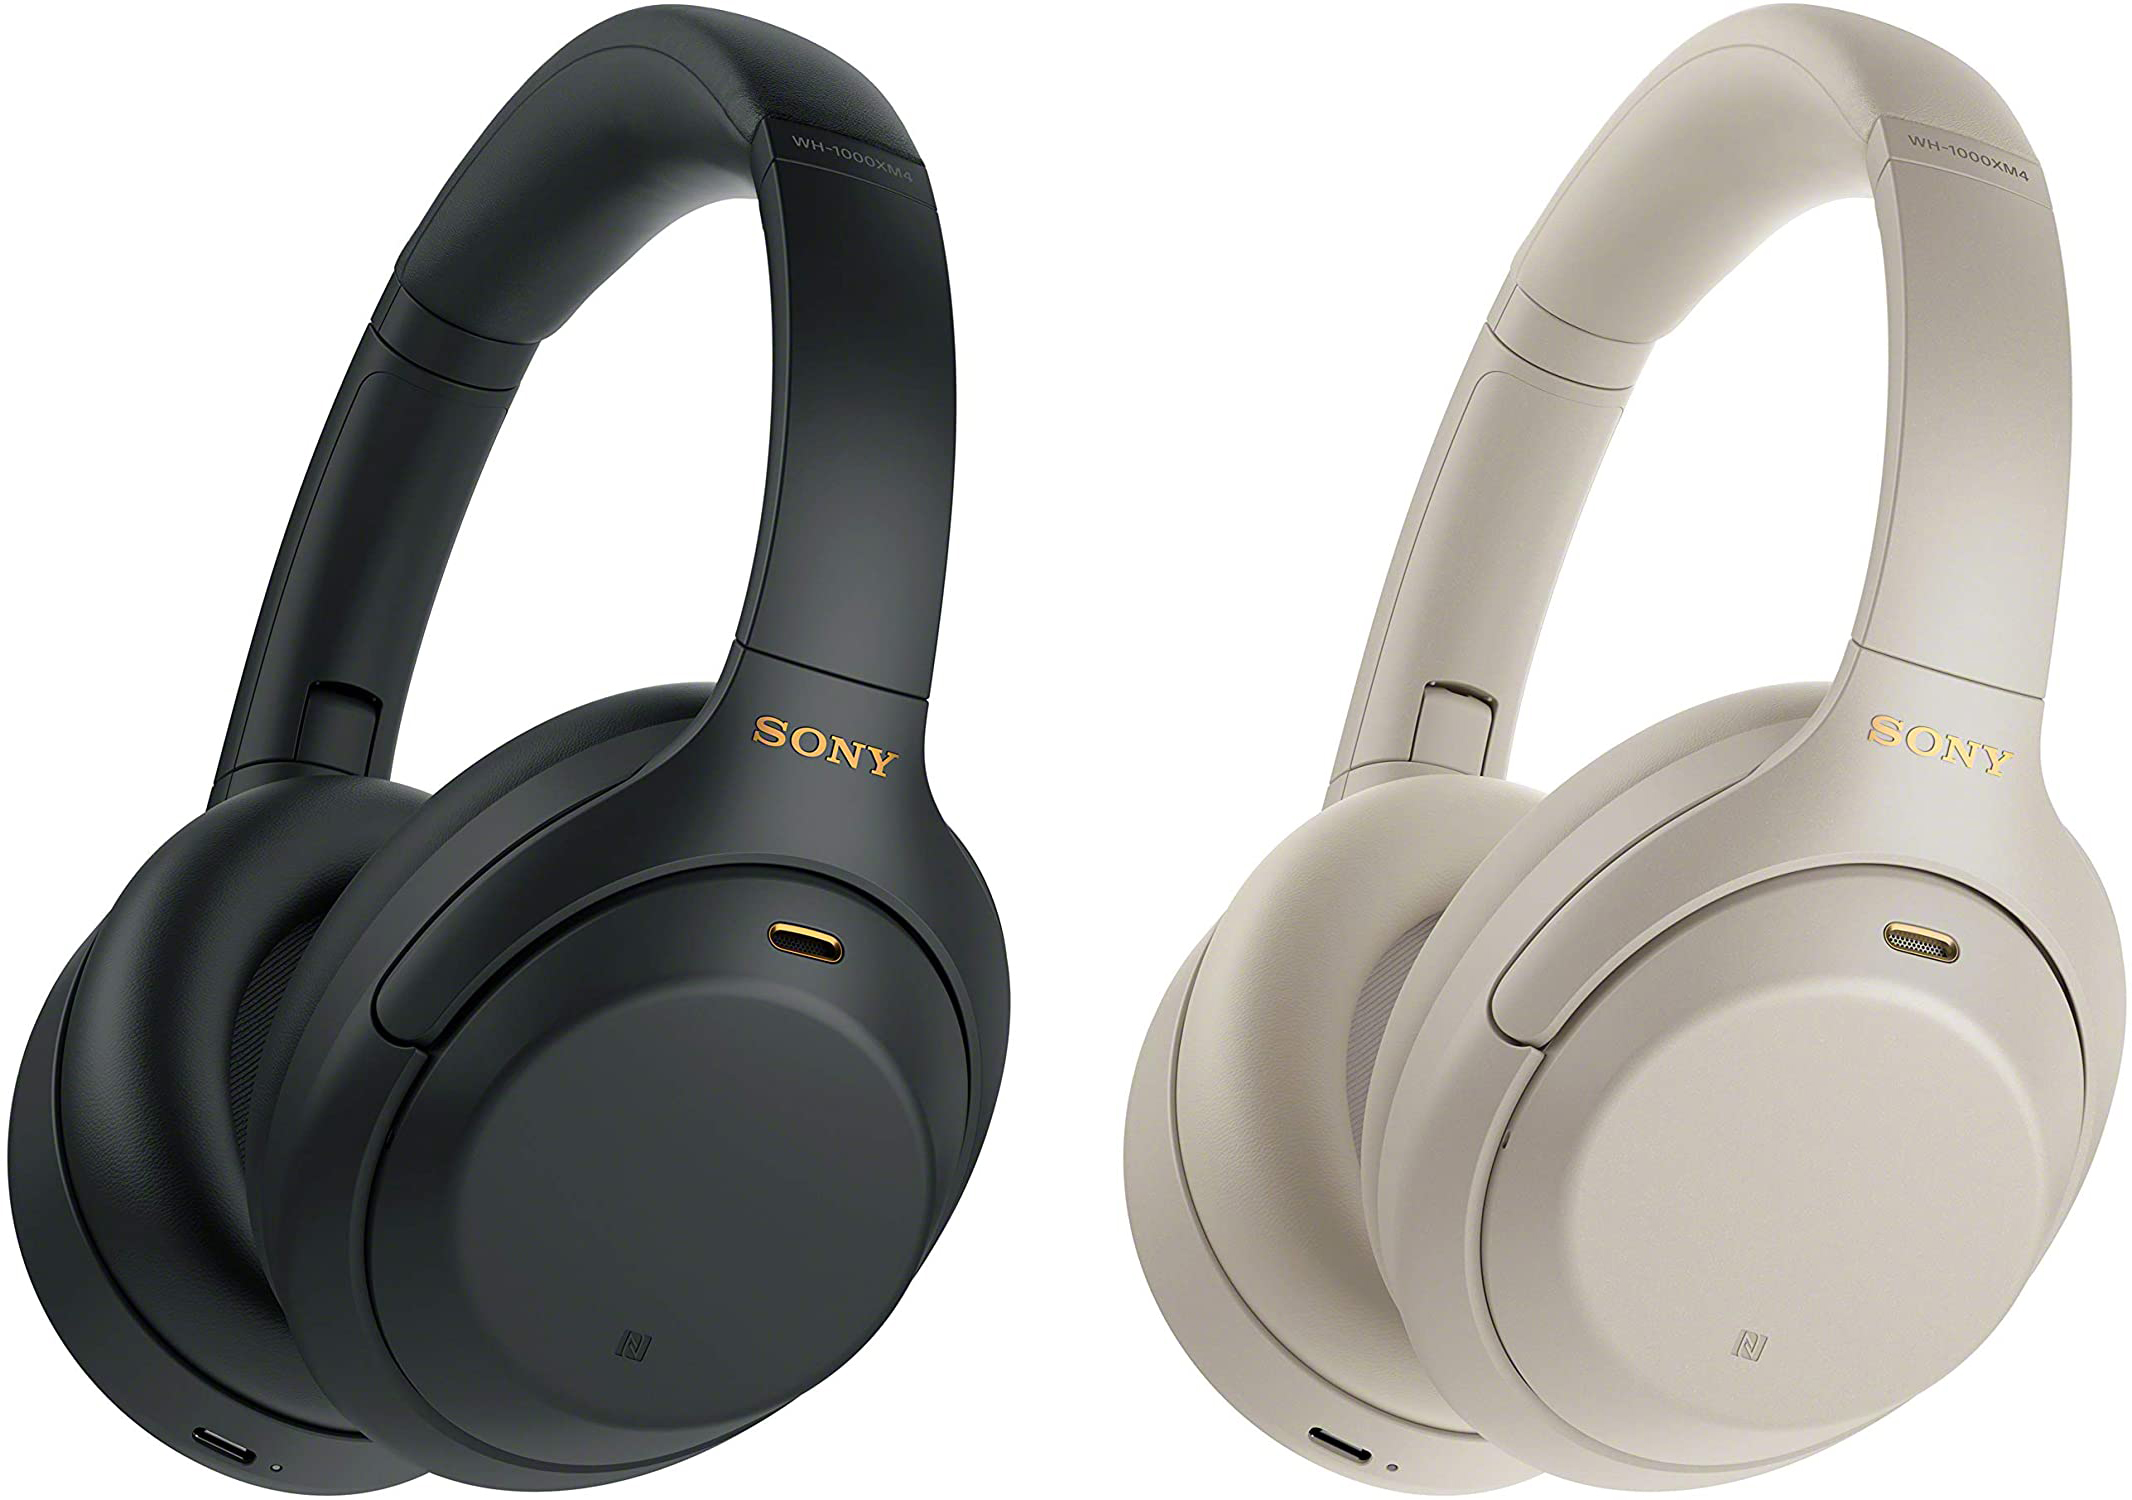 Sony improve upon the gold standard in everyday headphones with the new WH-1000XM4